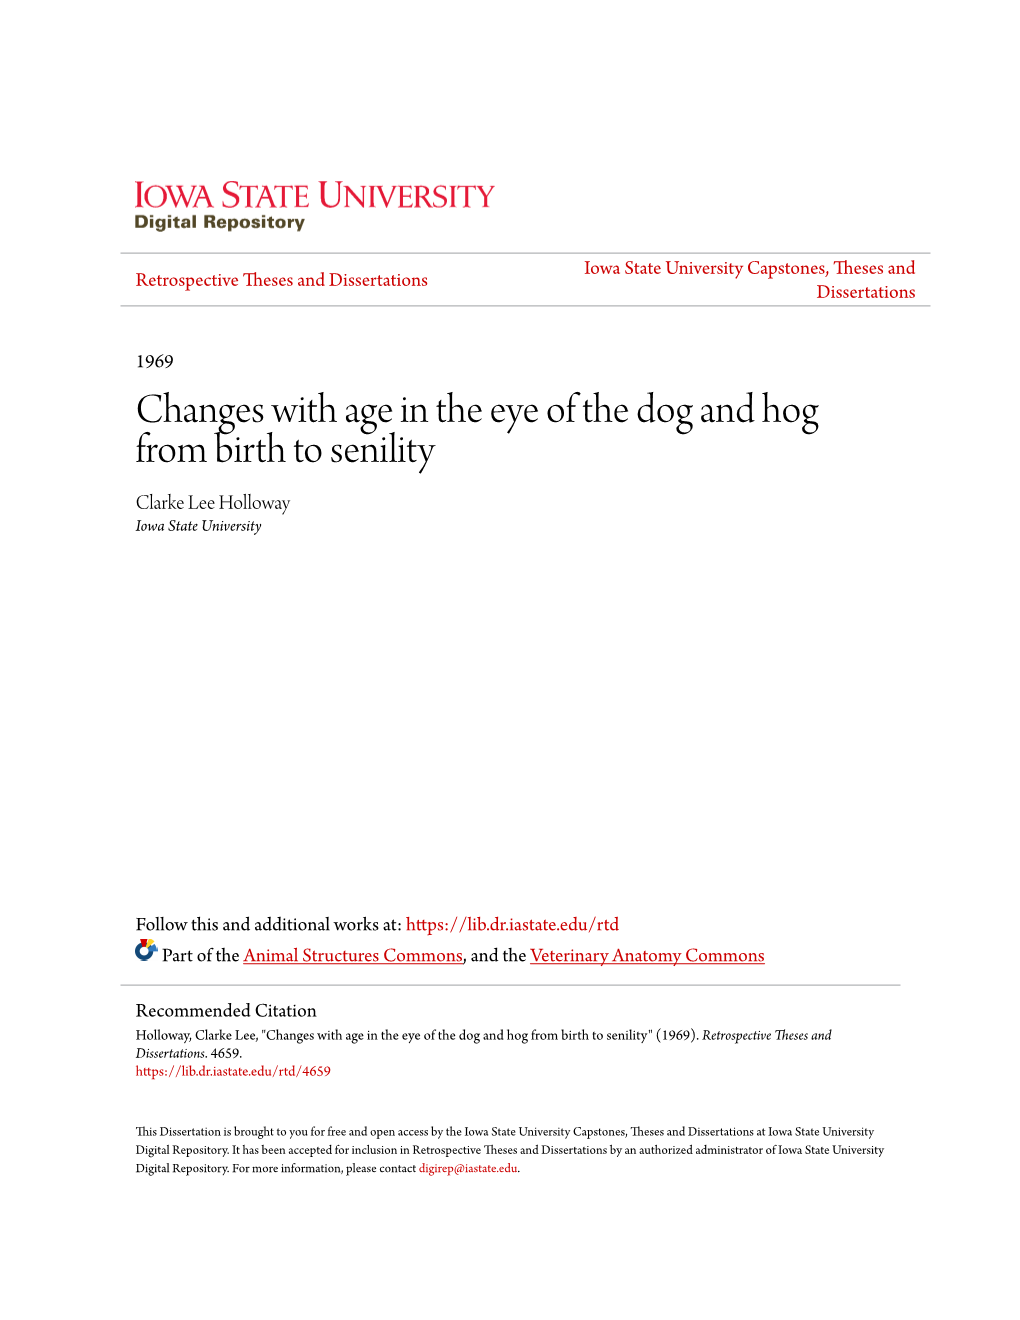 Changes with Age in the Eye of the Dog and Hog from Birth to Senility Clarke Lee Holloway Iowa State University